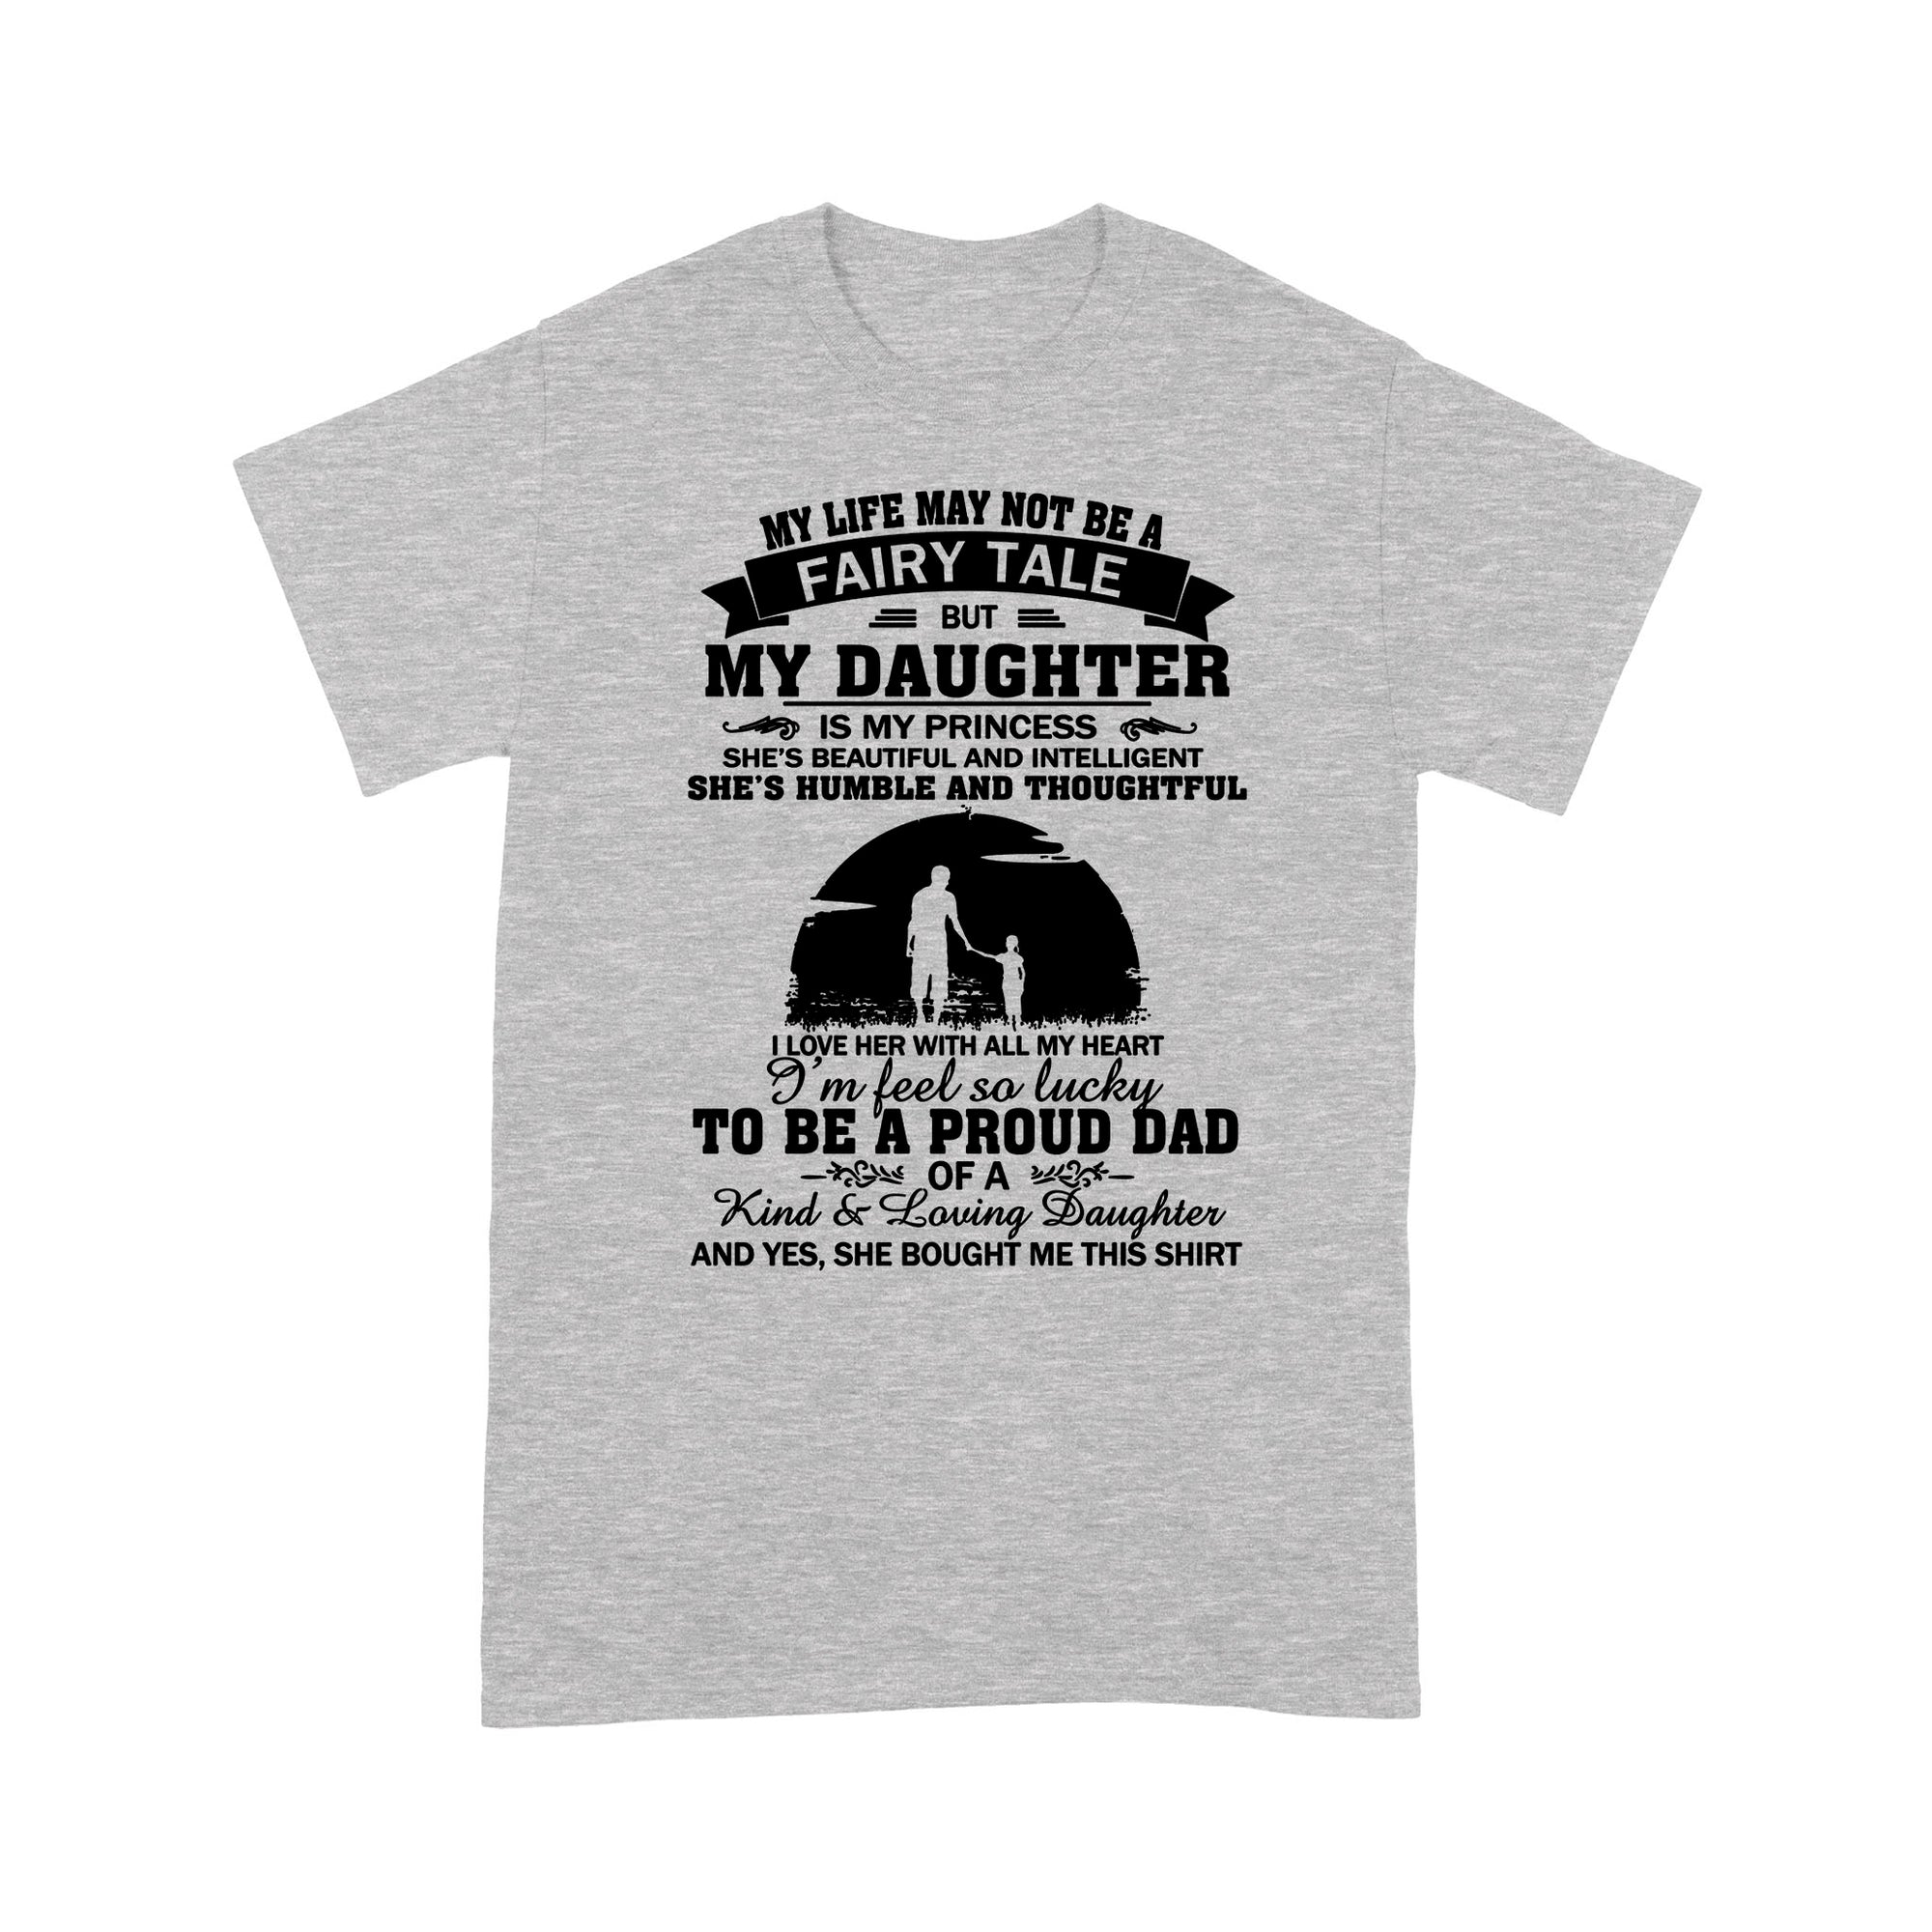 Gift Ideas for Dad My Life May Not Be A Fairy Tale But My Daughter Is My Princess I'm Feel So Lucky To Be A Proud Dad - Standard T-shirt